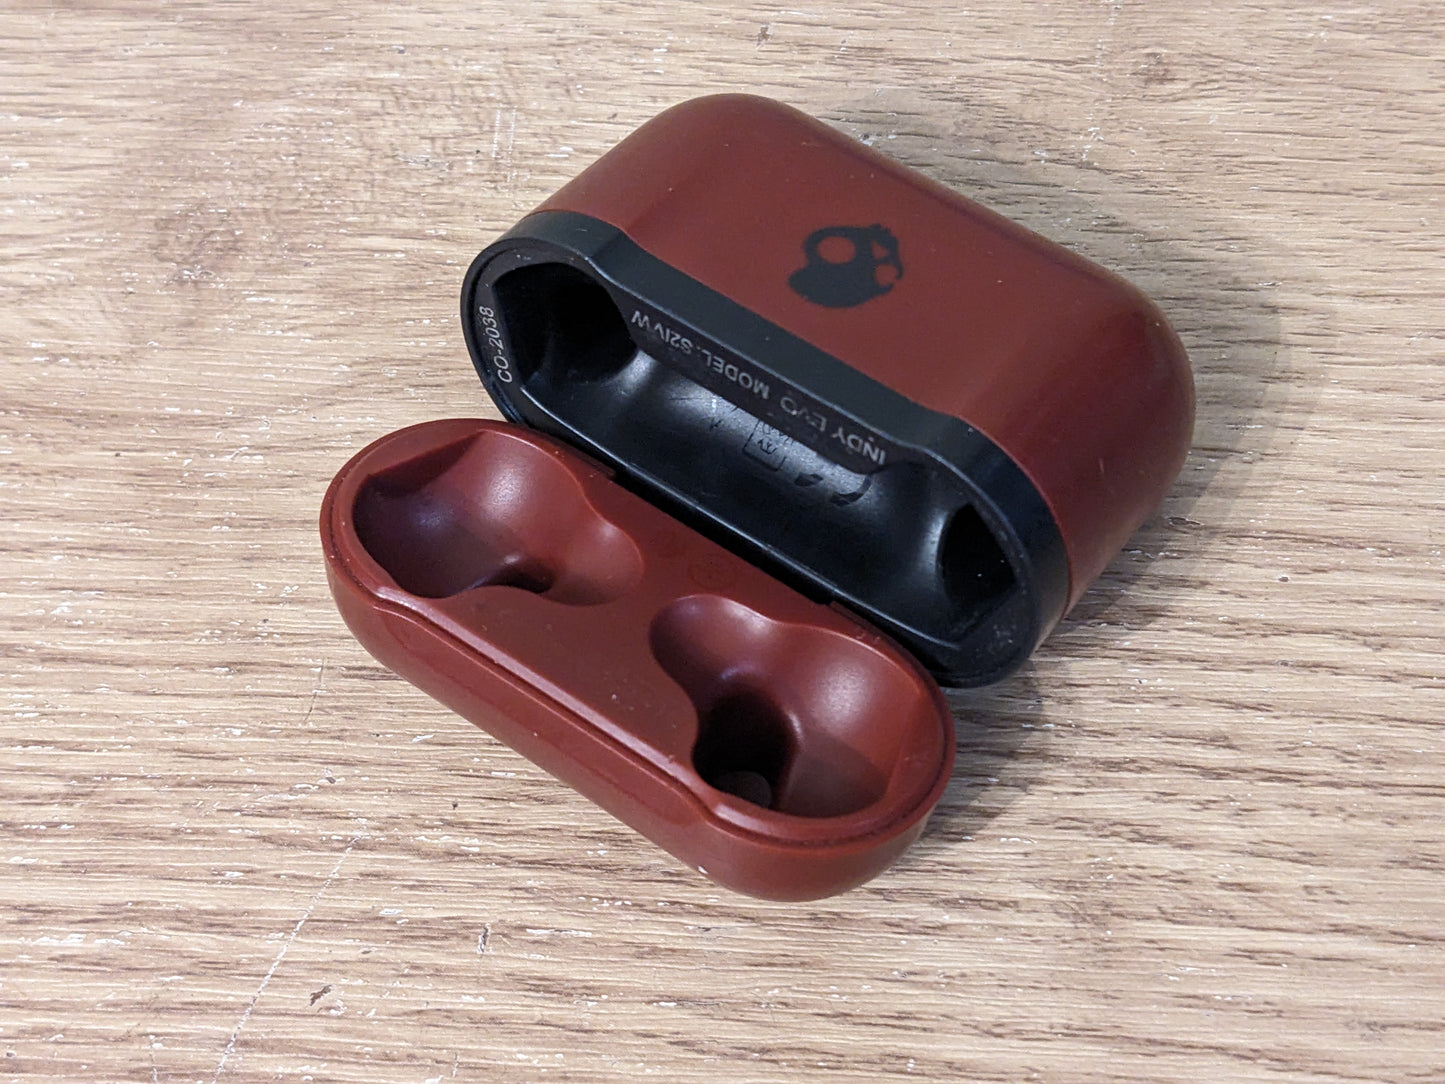 Skullcandy Indy Evo replacement parts: charging case, left/right earbuds